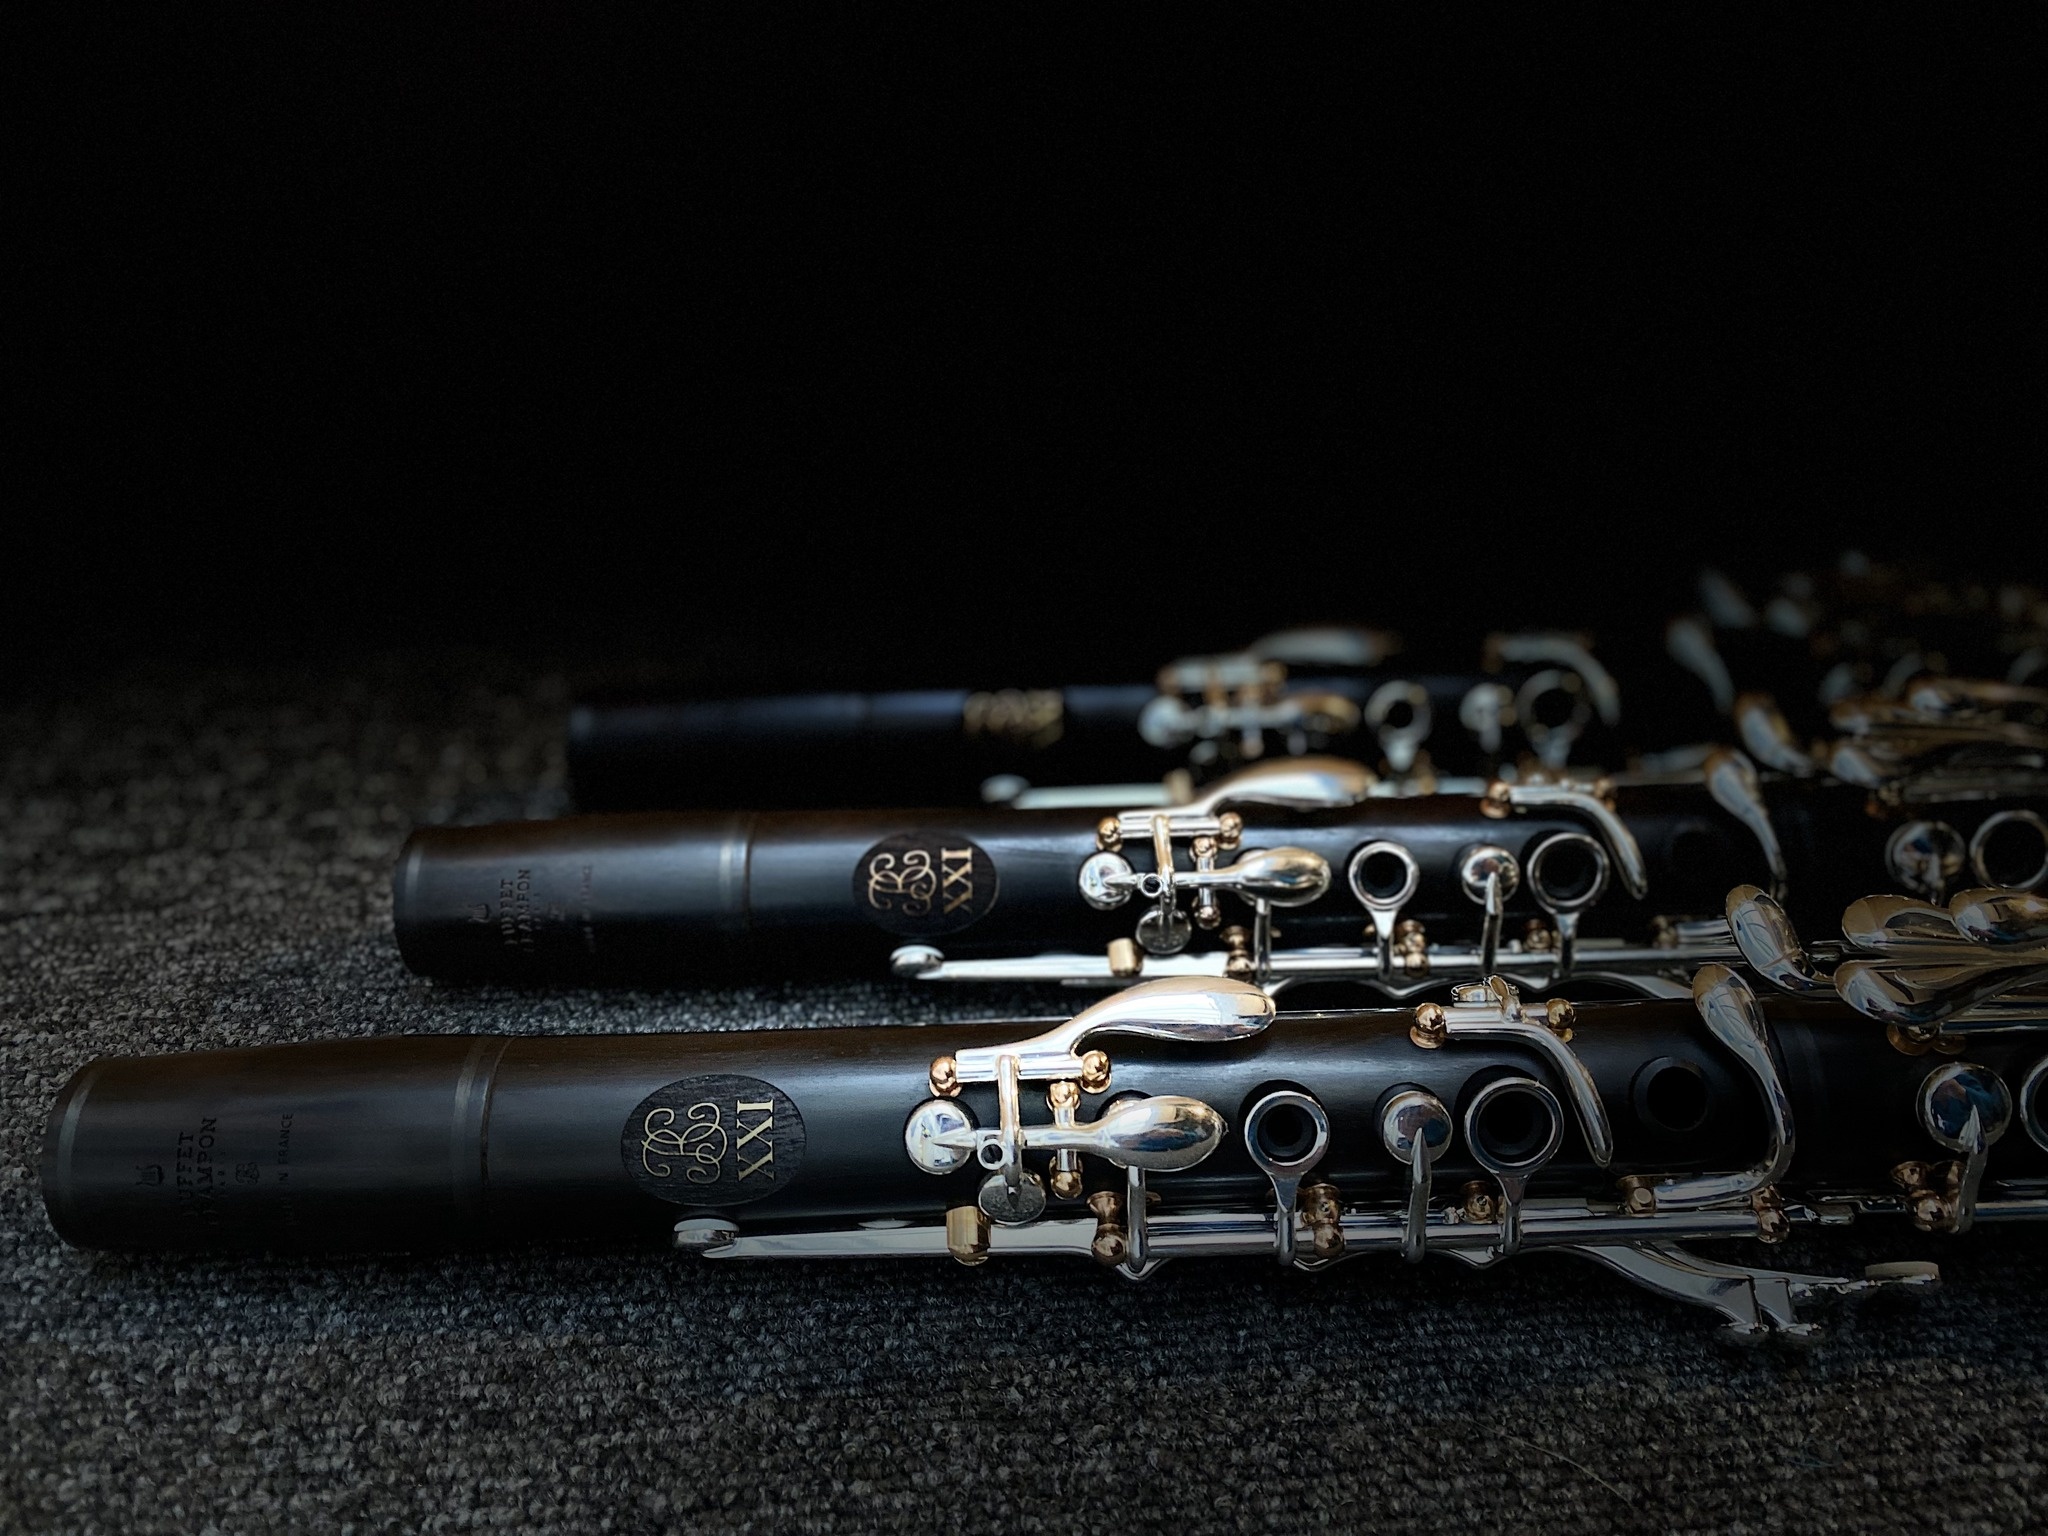 Clarinet: Buffet Crampon BCXXI clarinet, Extended lower joint, Natural Grenadilla body, Silver-plated keywork. 2050x1540 HD Wallpaper.